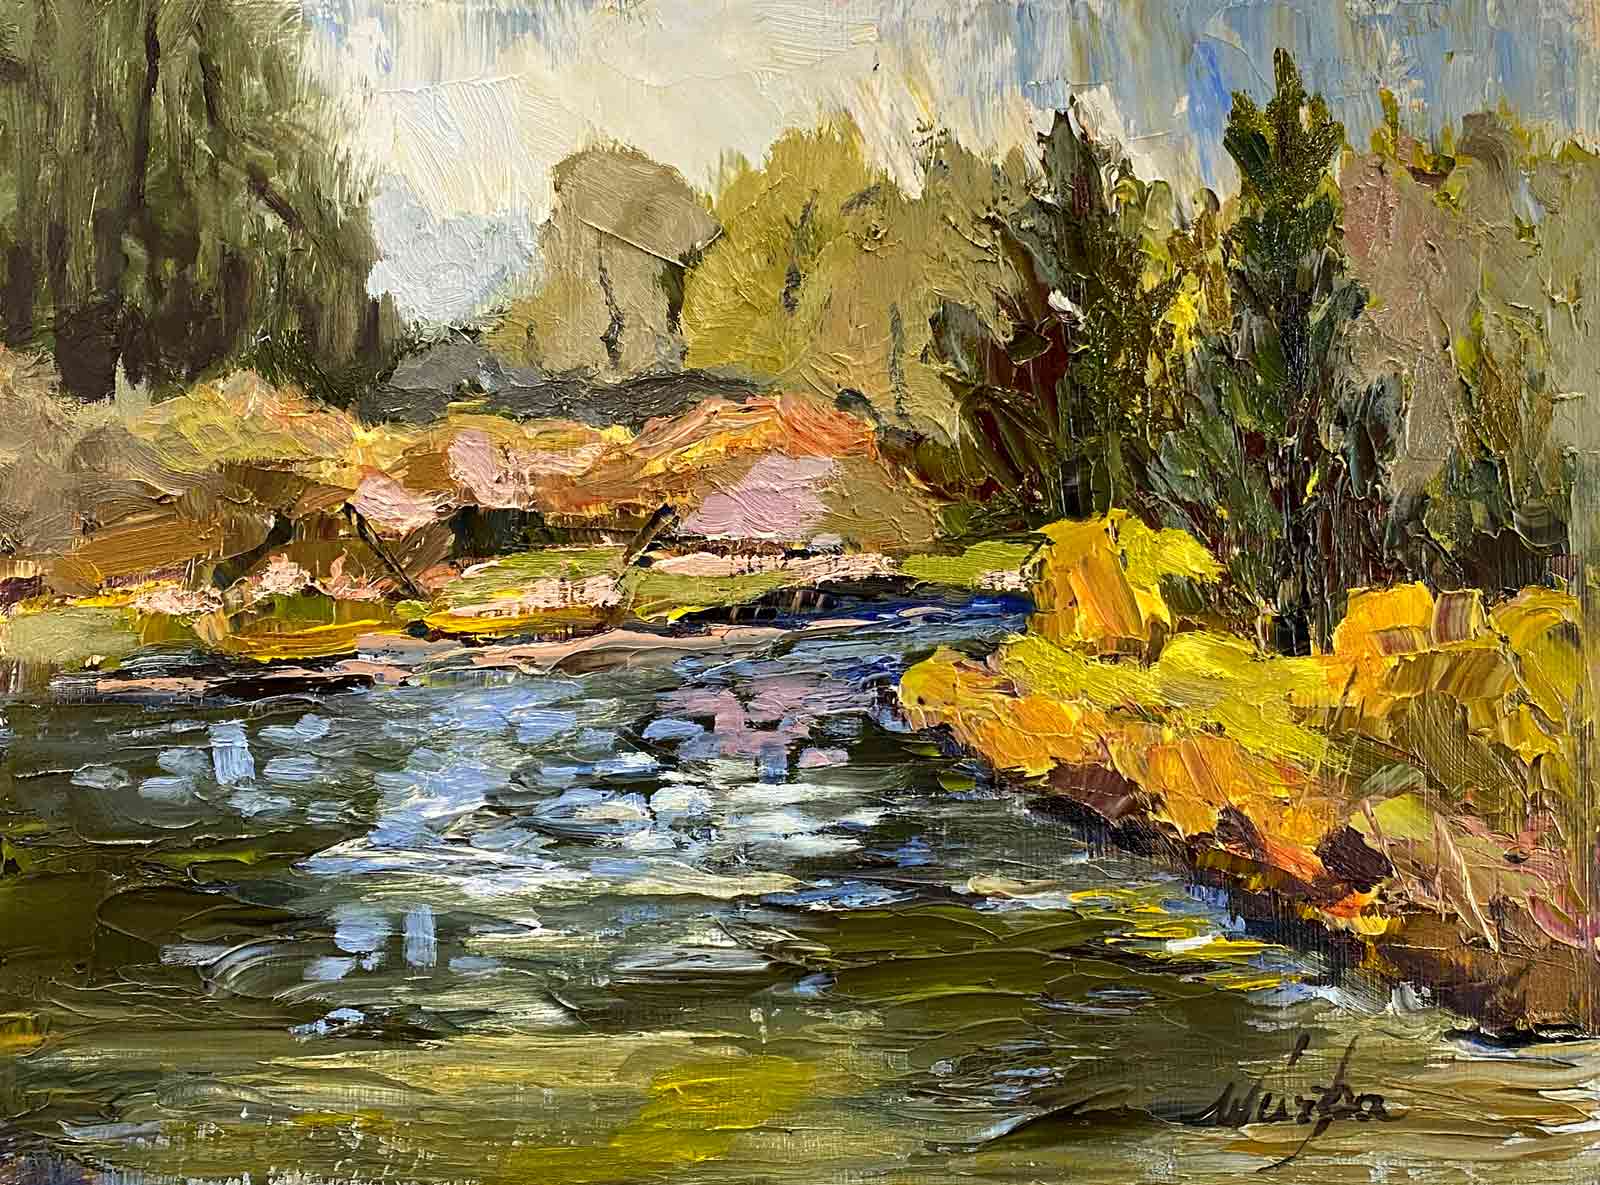 Oil painting of the Deschutes River through Central Oregon by Shelly Wierzba.